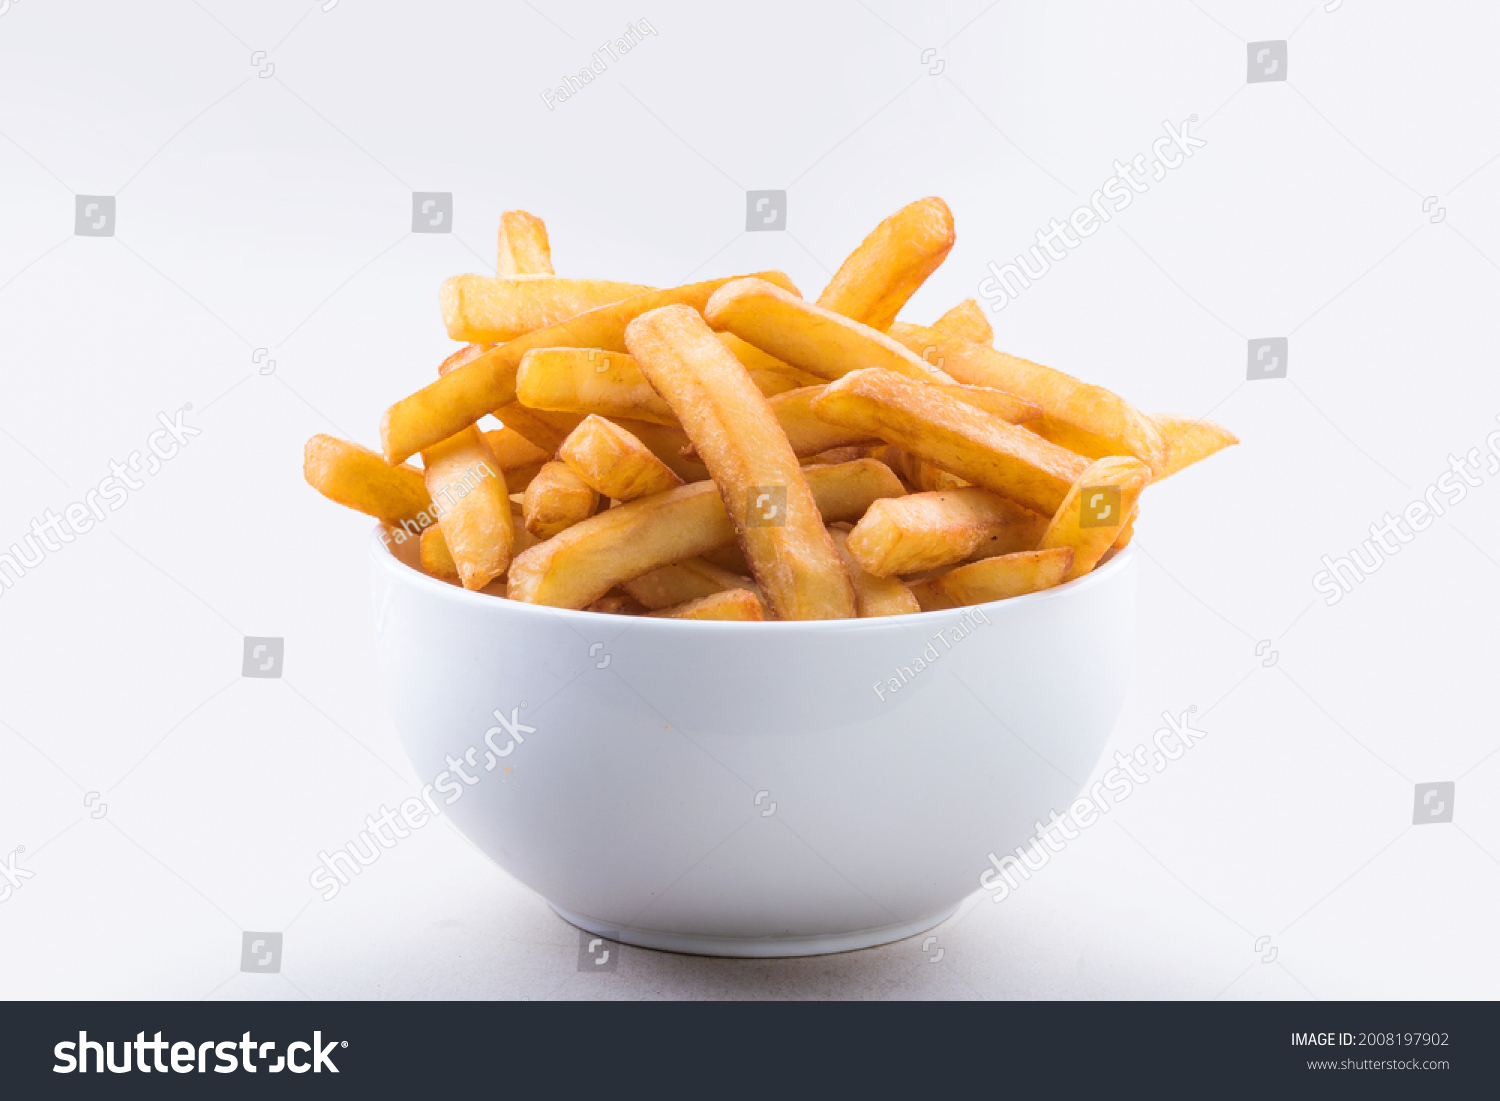 A bowl of crispy french fries isolated on white background.
 #2008197902